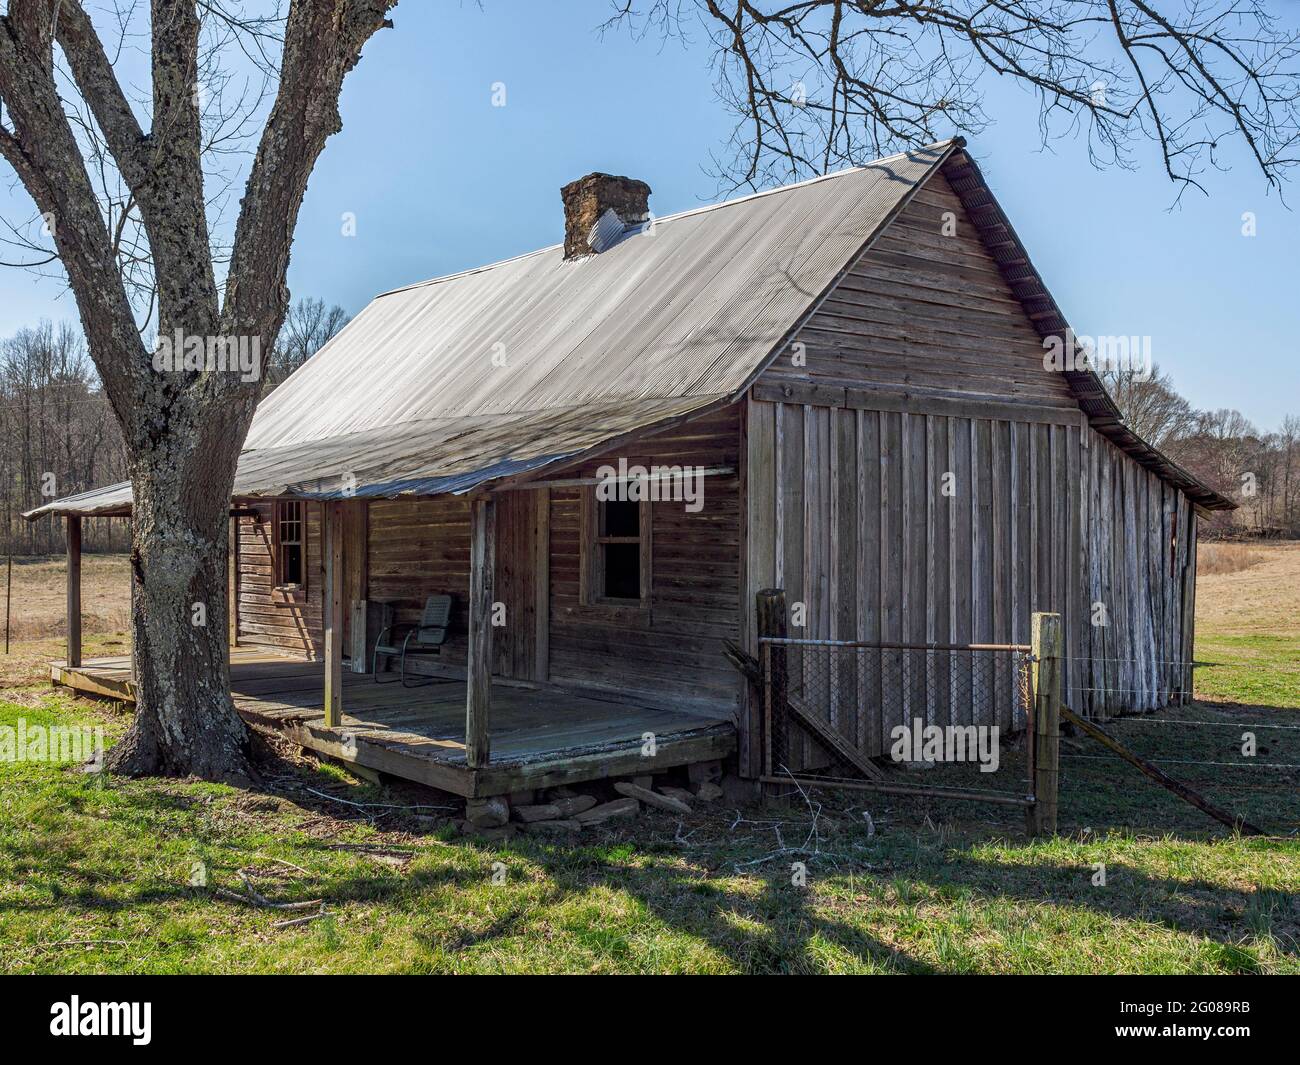 Old abandoned pioneer wood cabin with a covered front porch, in rural Alabama, USA. Stock Photo